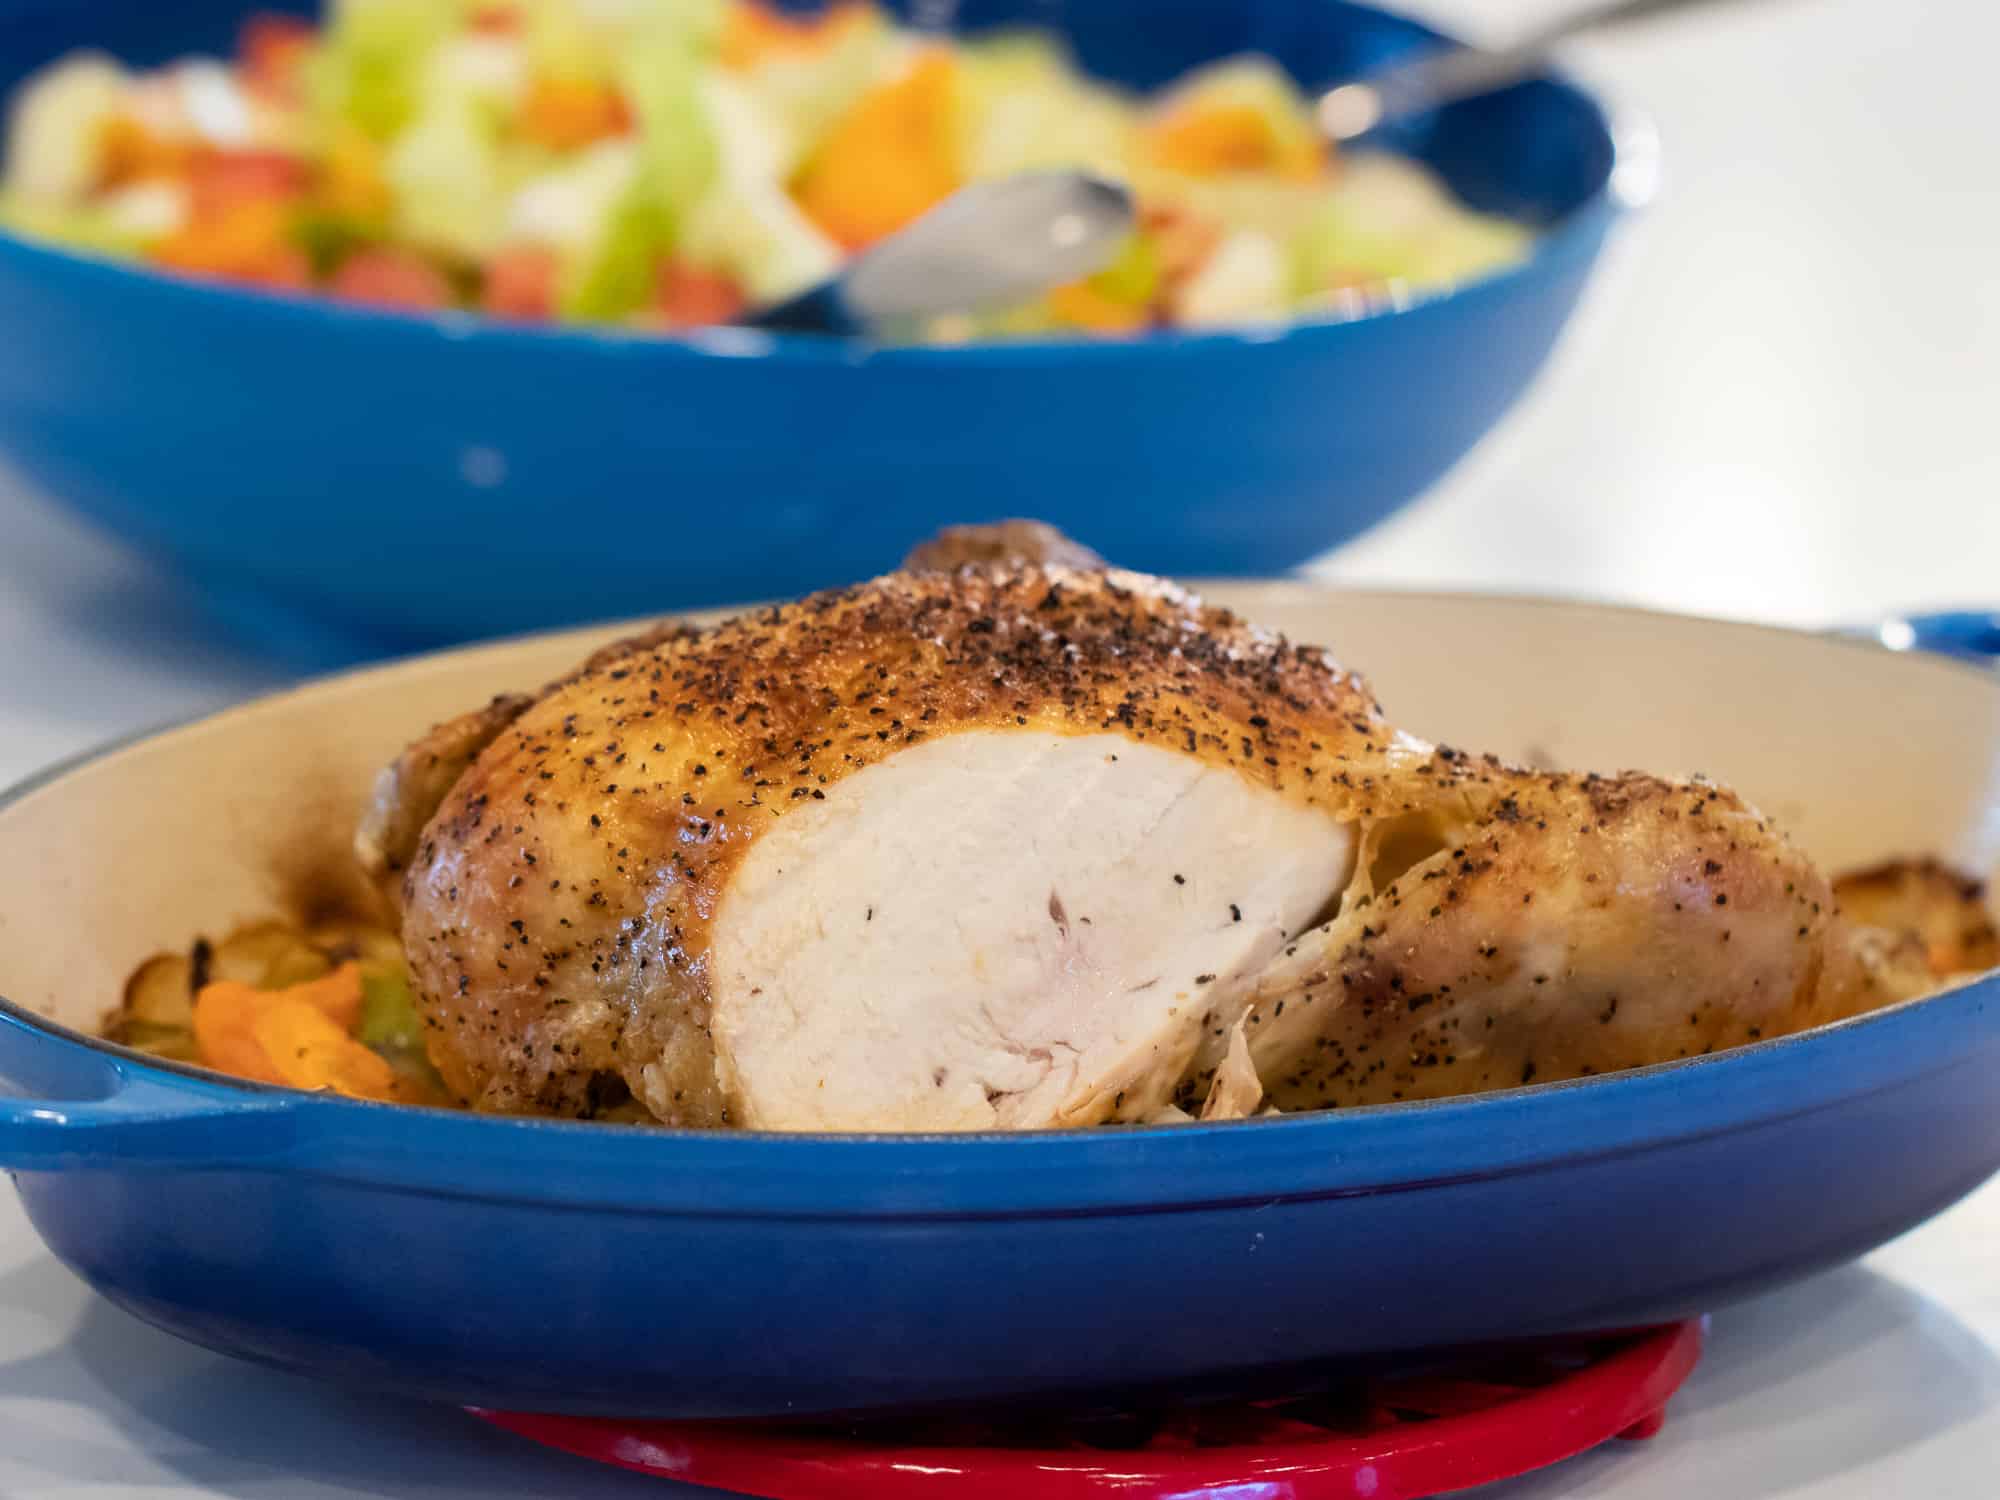 Carve the chicken after it rests for 10 minutes.